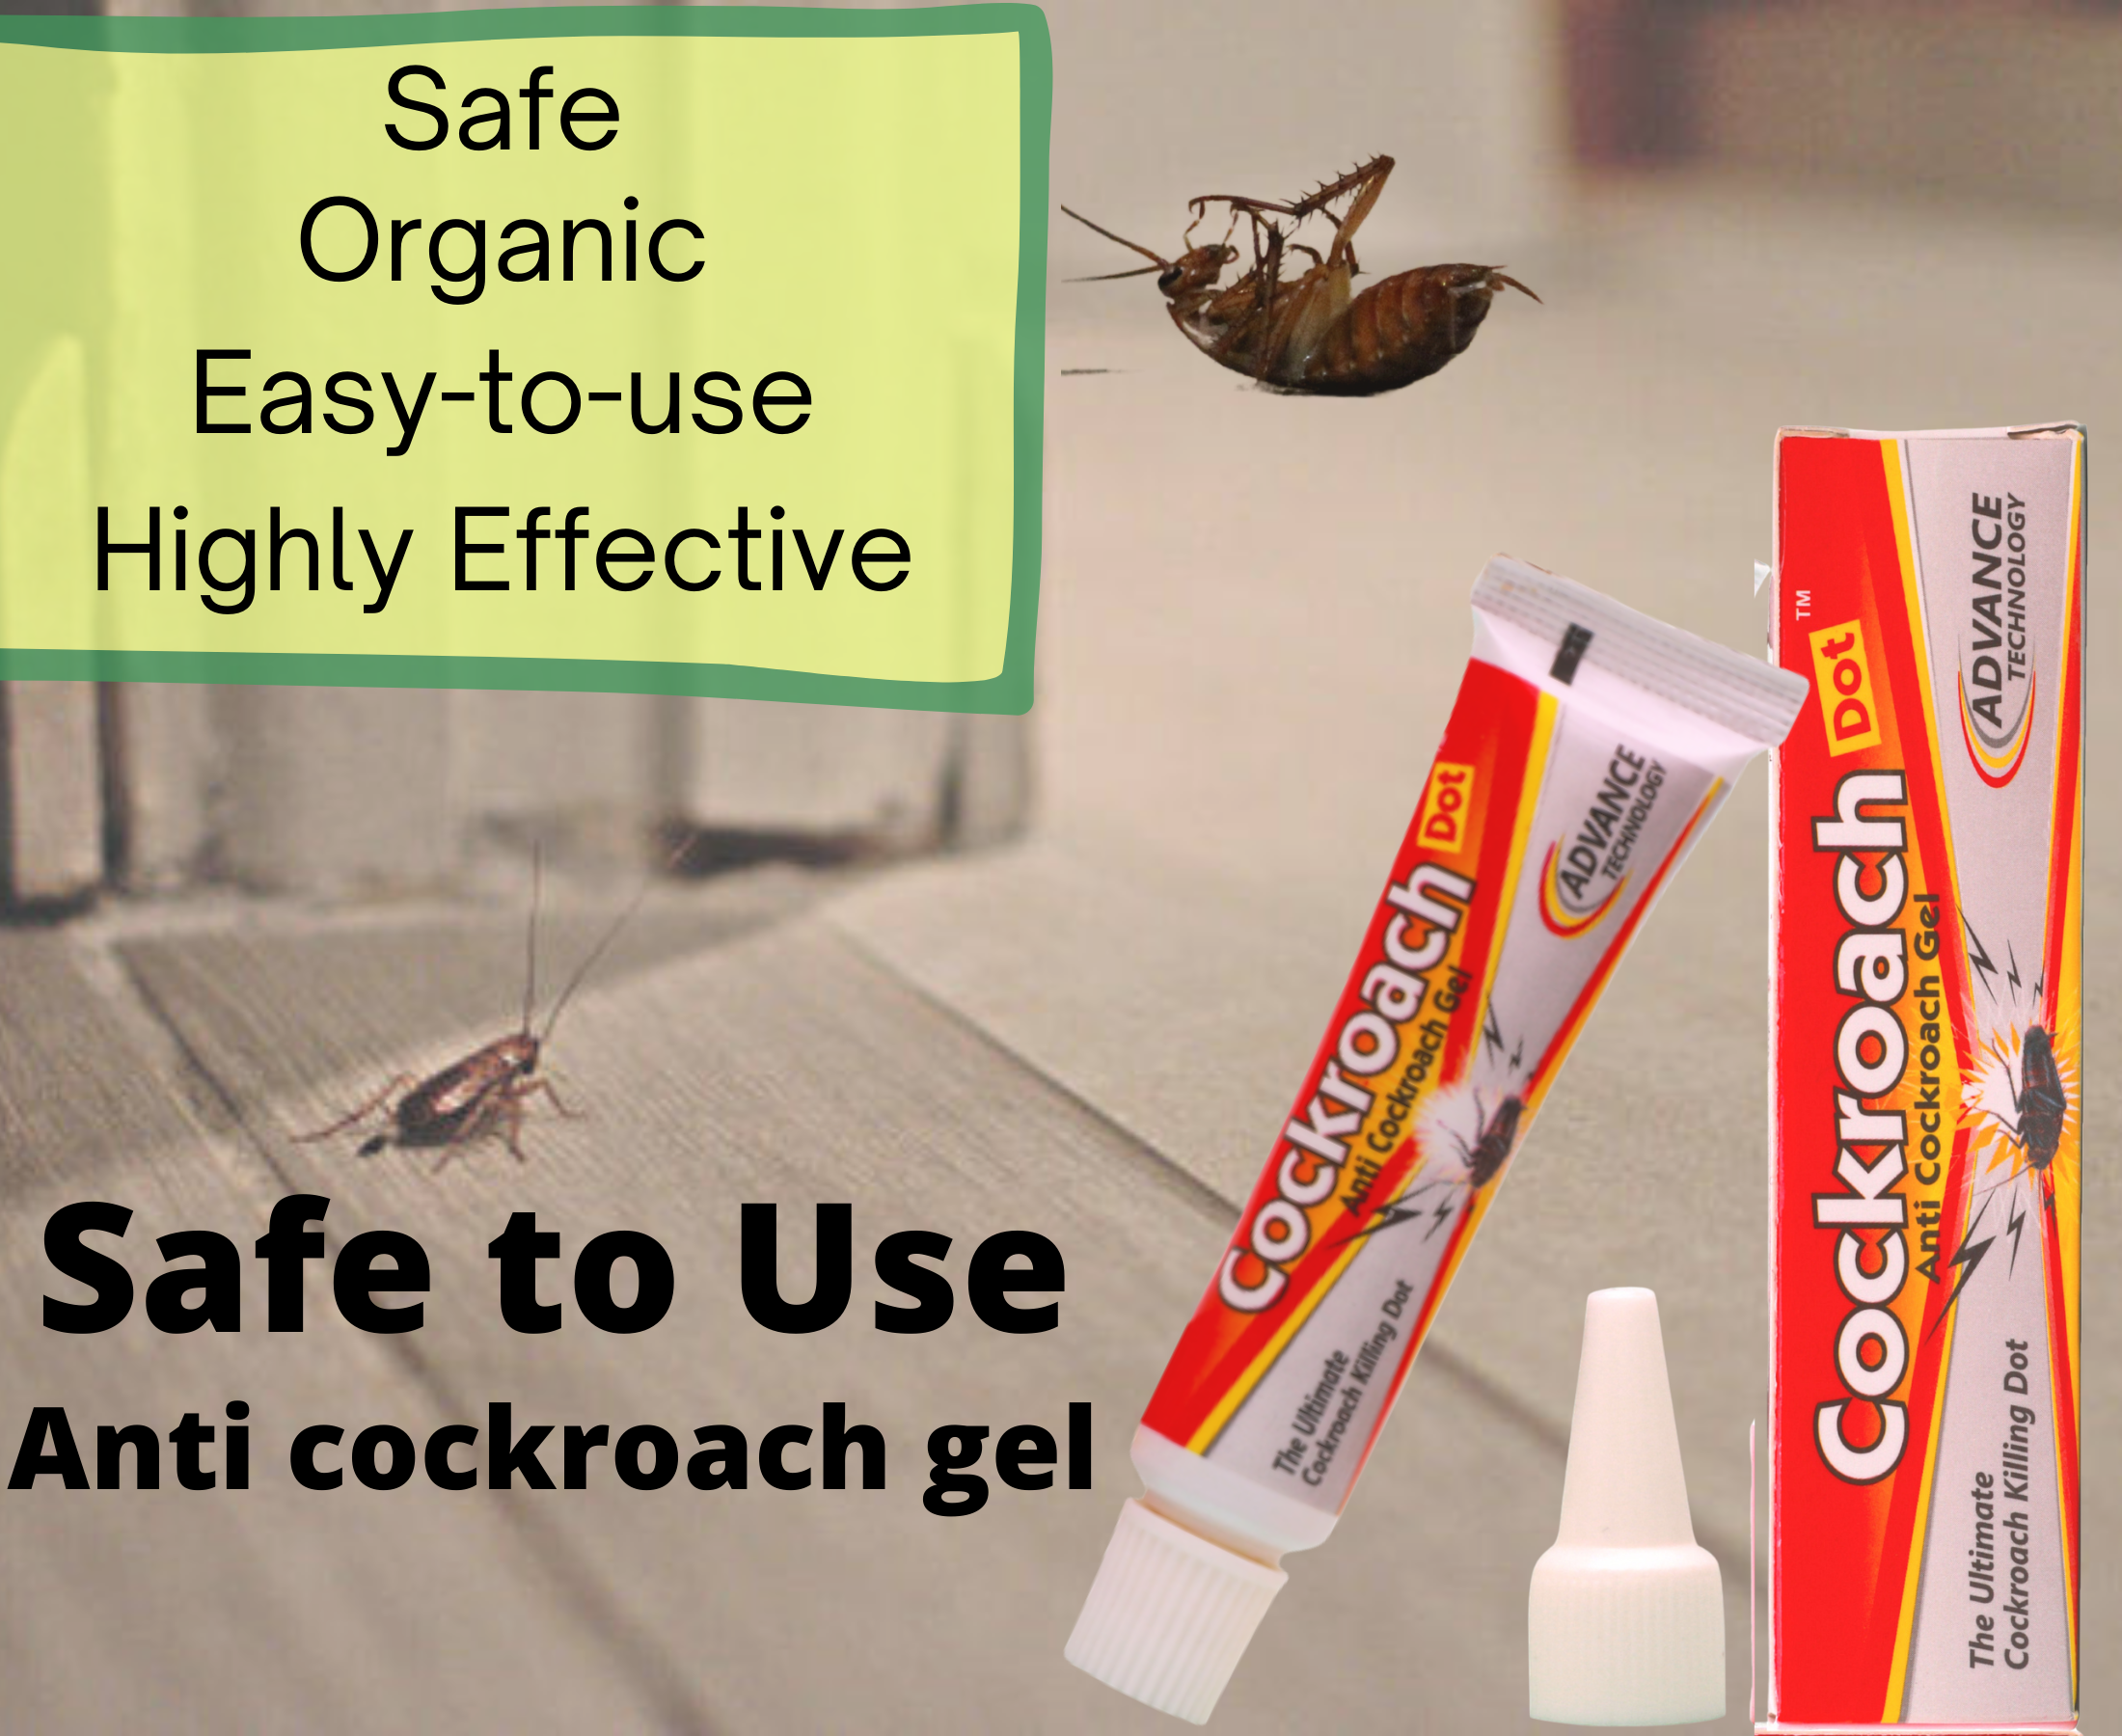 Is anti cockroach gel safe for human or not?